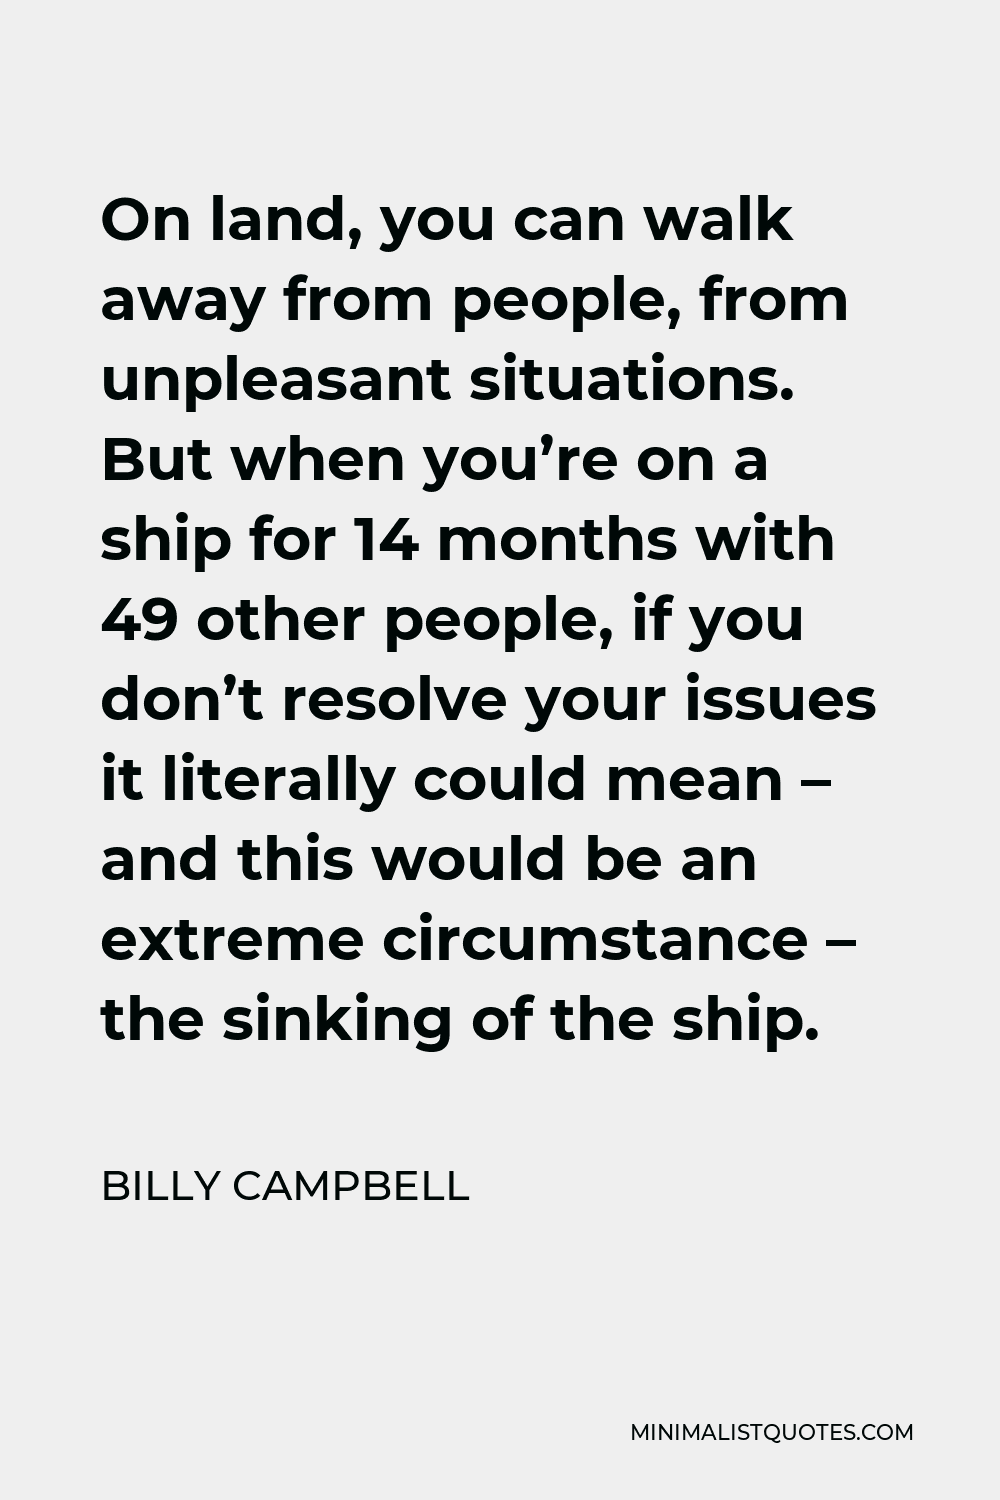 Billy Campbell Quote - On land, you can walk away from people, from unpleasant situations. But when you’re on a ship for 14 months with 49 other people, if you don’t resolve your issues it literally could mean – and this would be an extreme circumstance – the sinking of the ship.